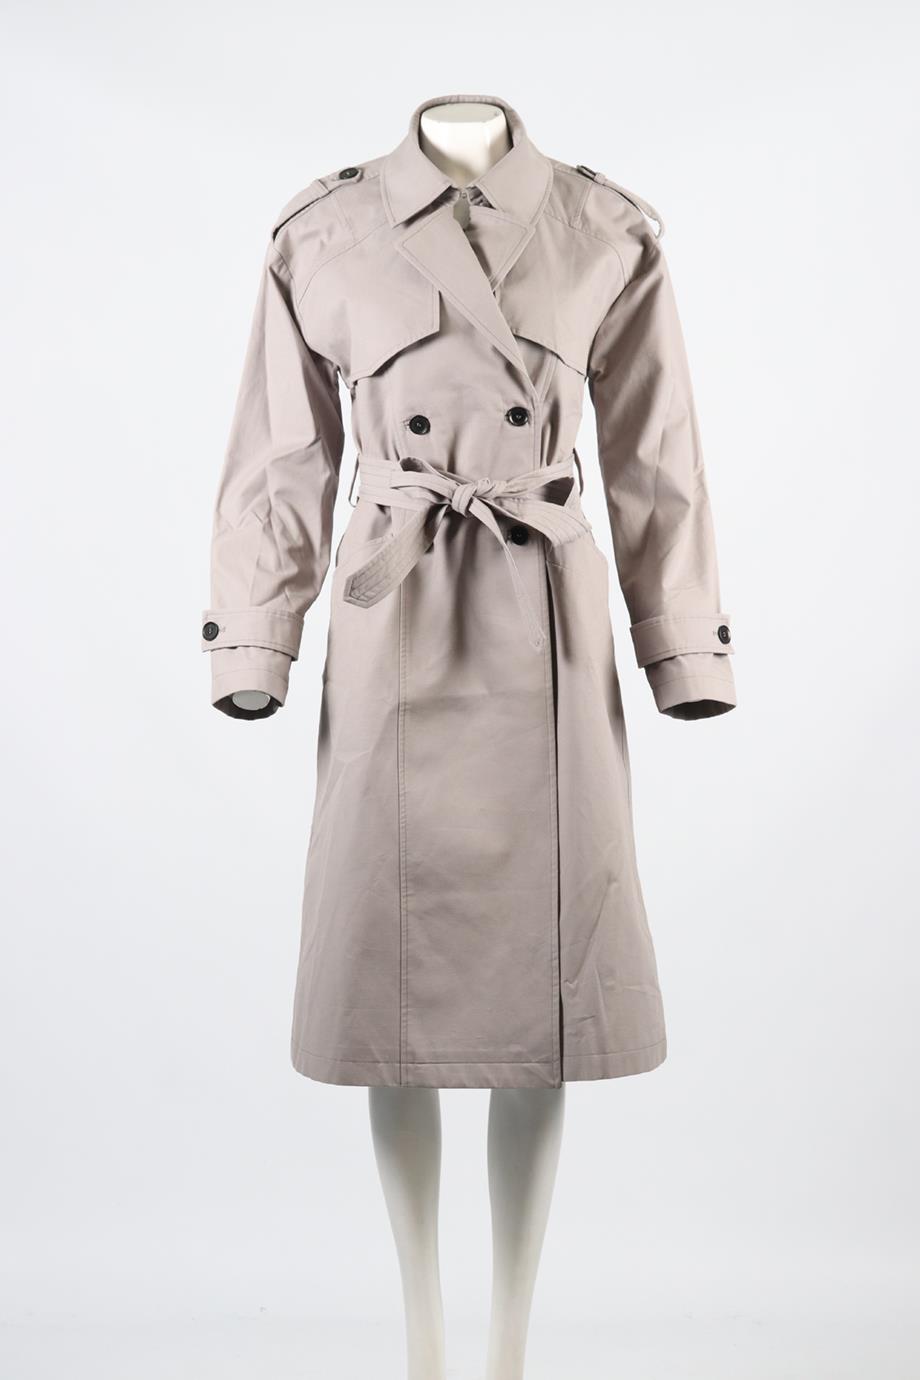 ANINE BING DOUBLE BREASTED BELTED COTTON TRENCH COAT SMALL